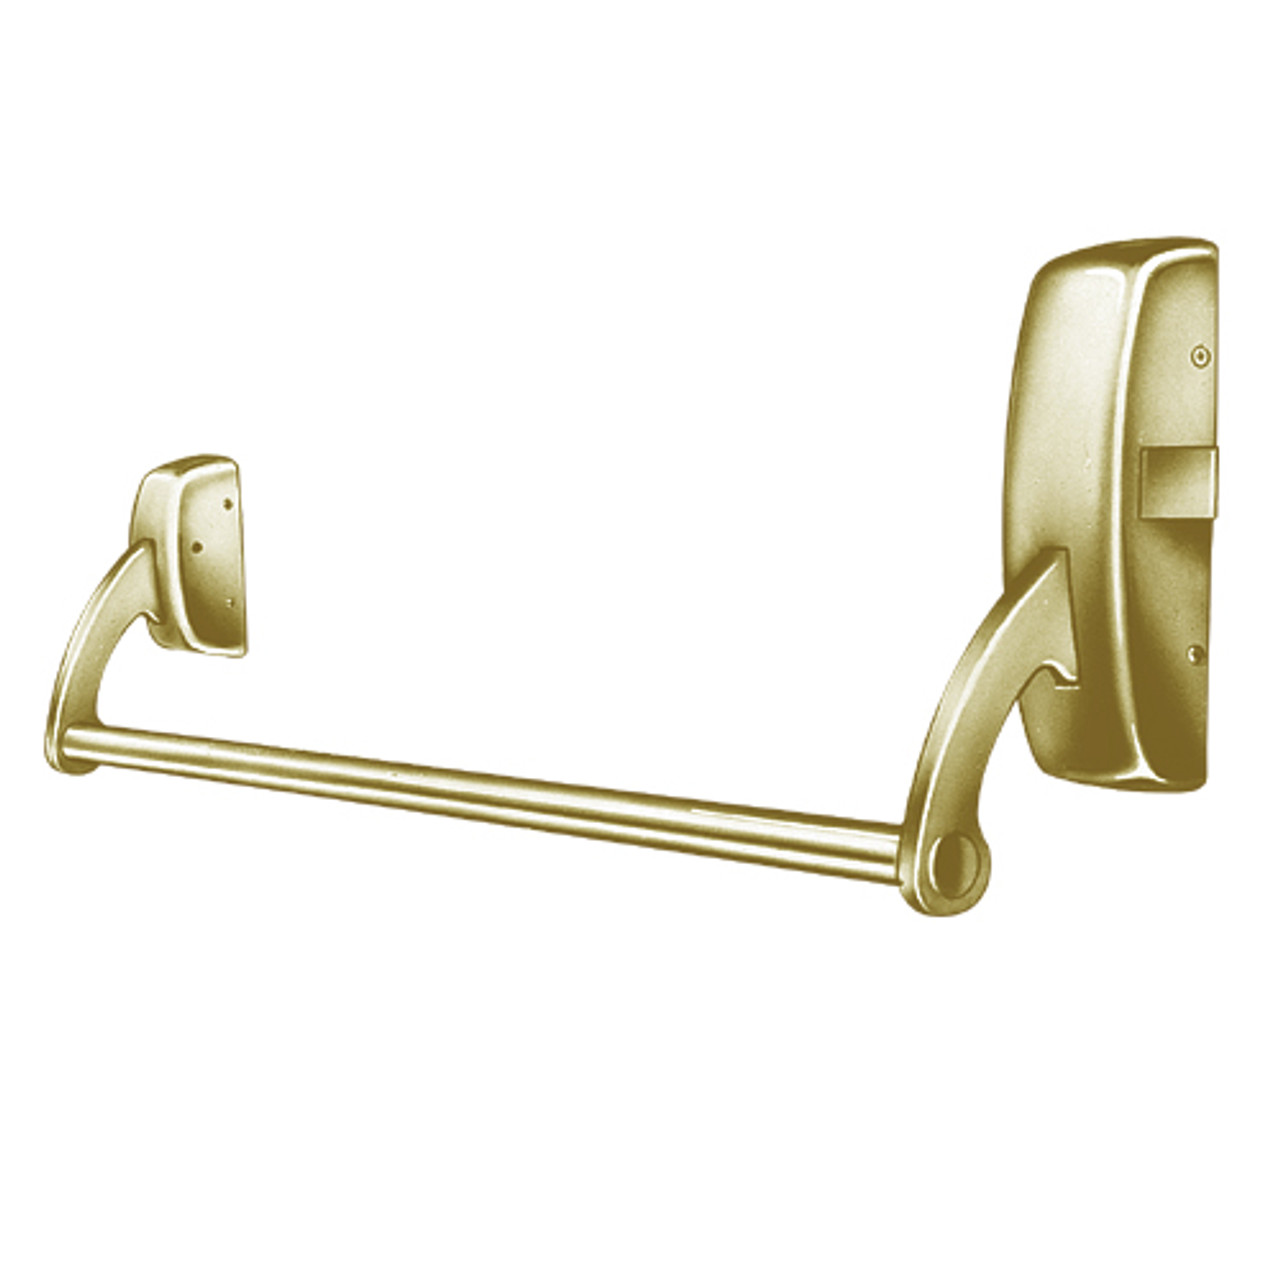 9898-04 Sargent 90 Series Reversible Rim Exit Device in Satin Brass